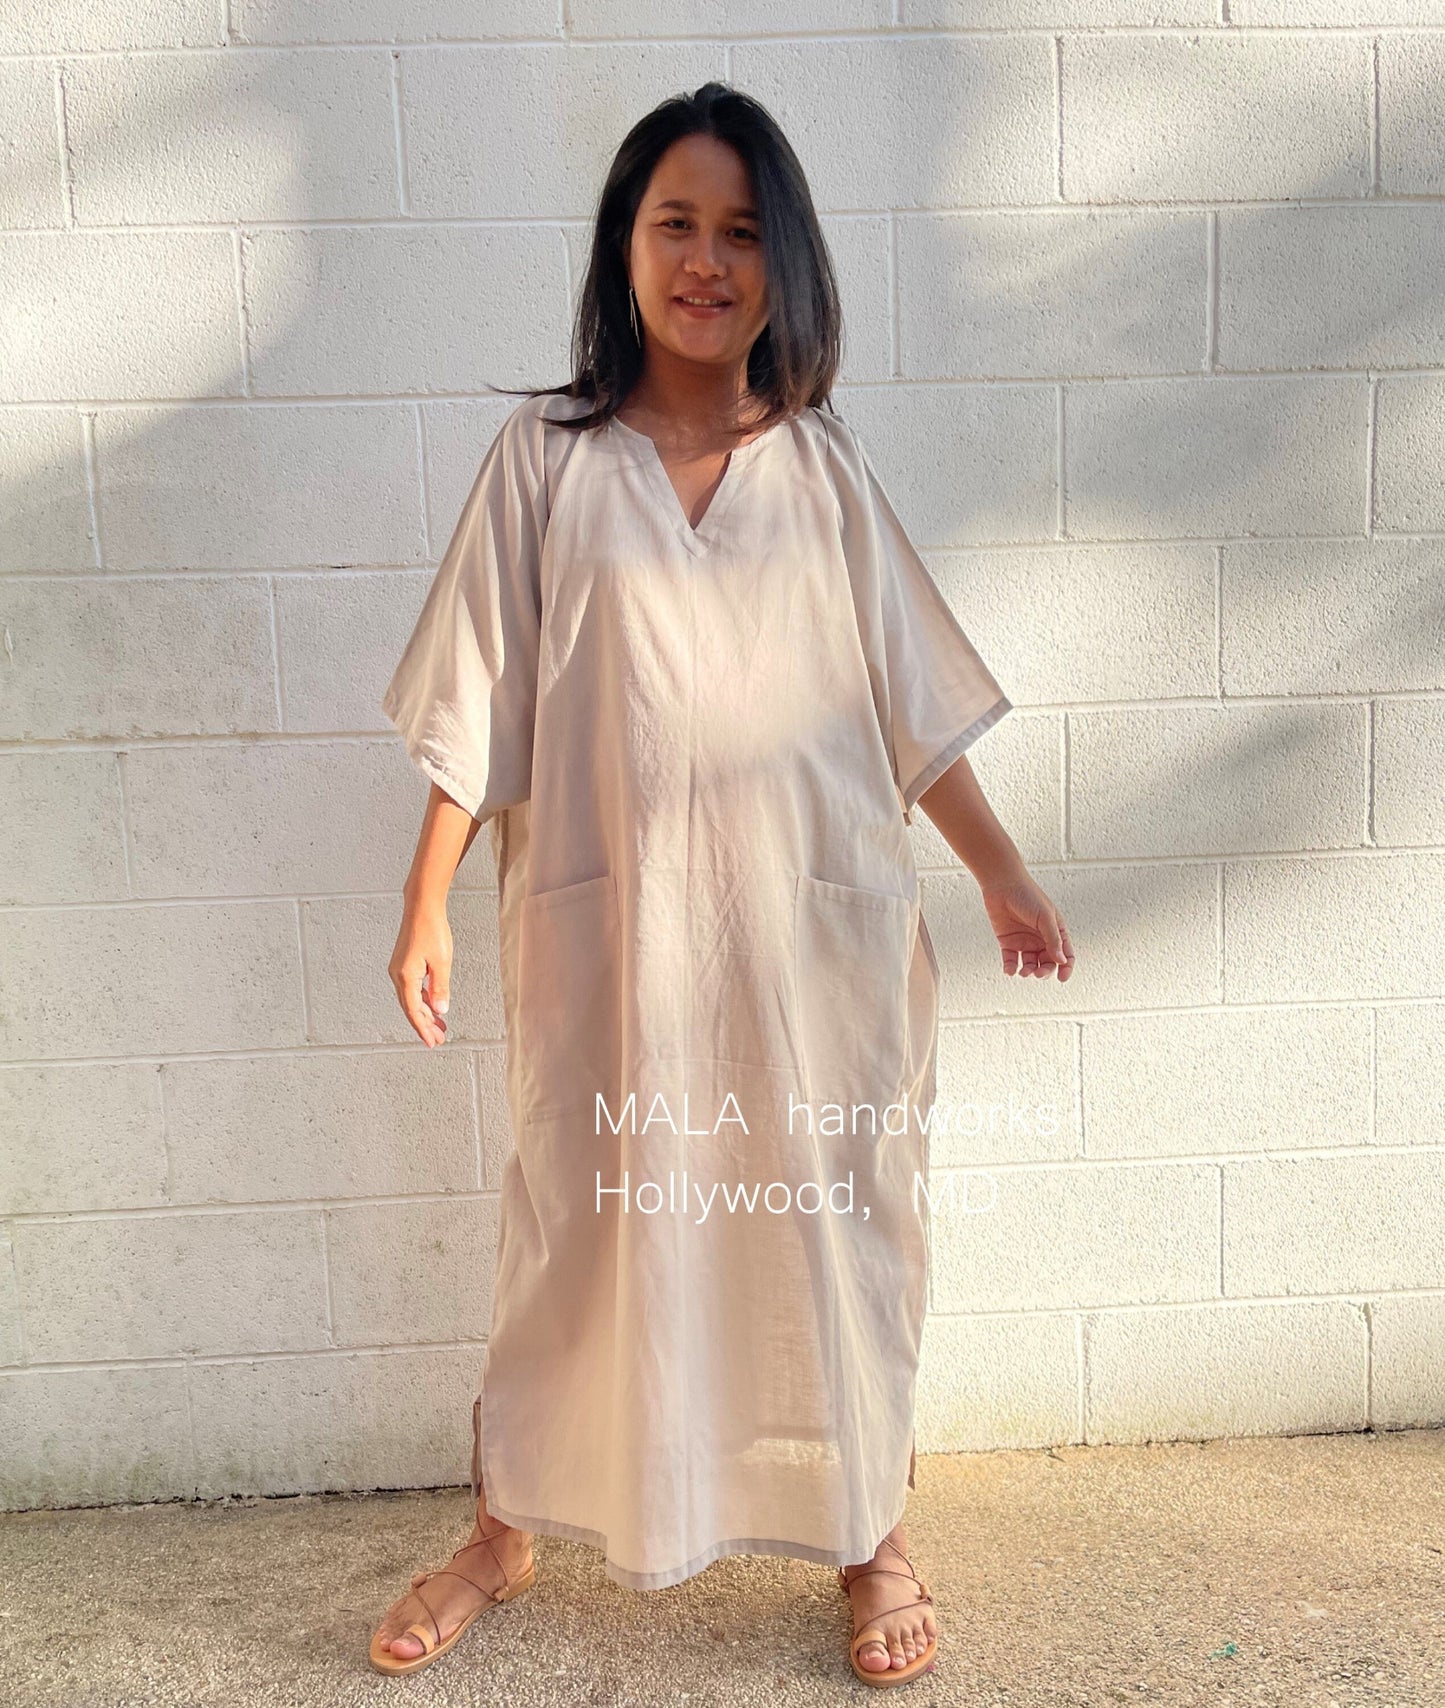 MALA handworks  Evelyn semi sheer Kaftan in Light Brown with Pockets - Limited Edition